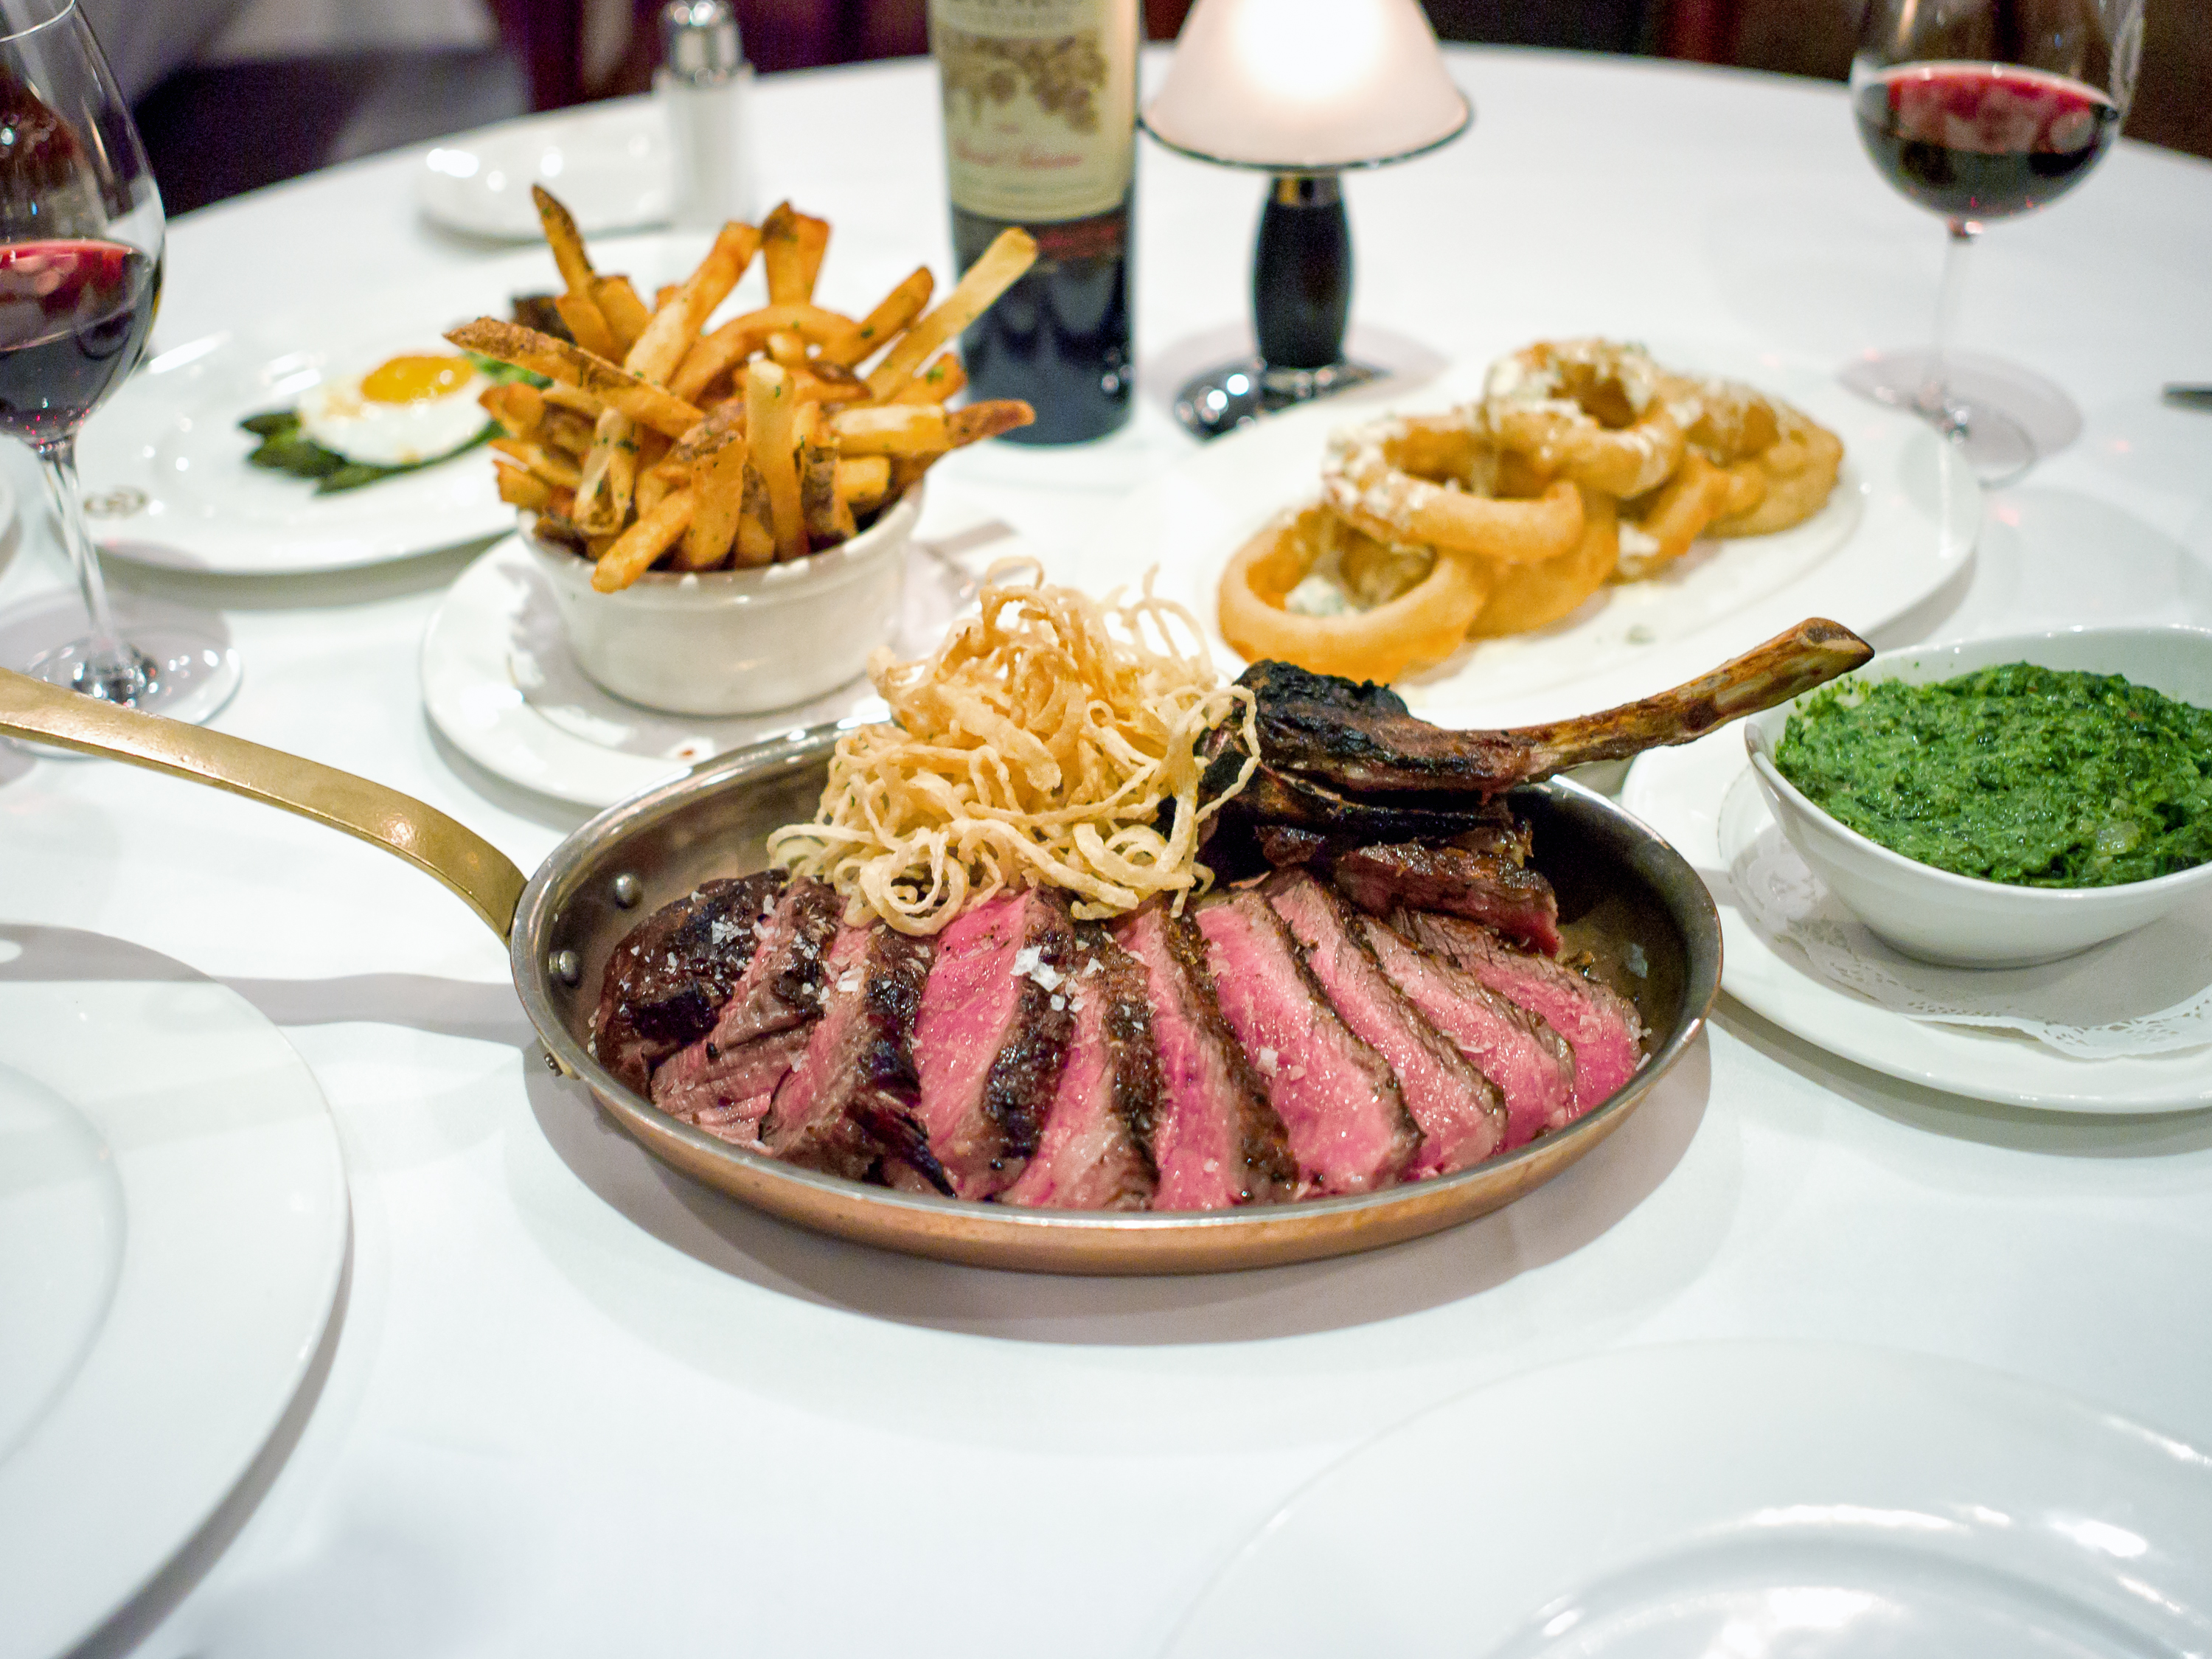 A steak on a crowded table with creamed spinach and french fries at Delmonico’s.